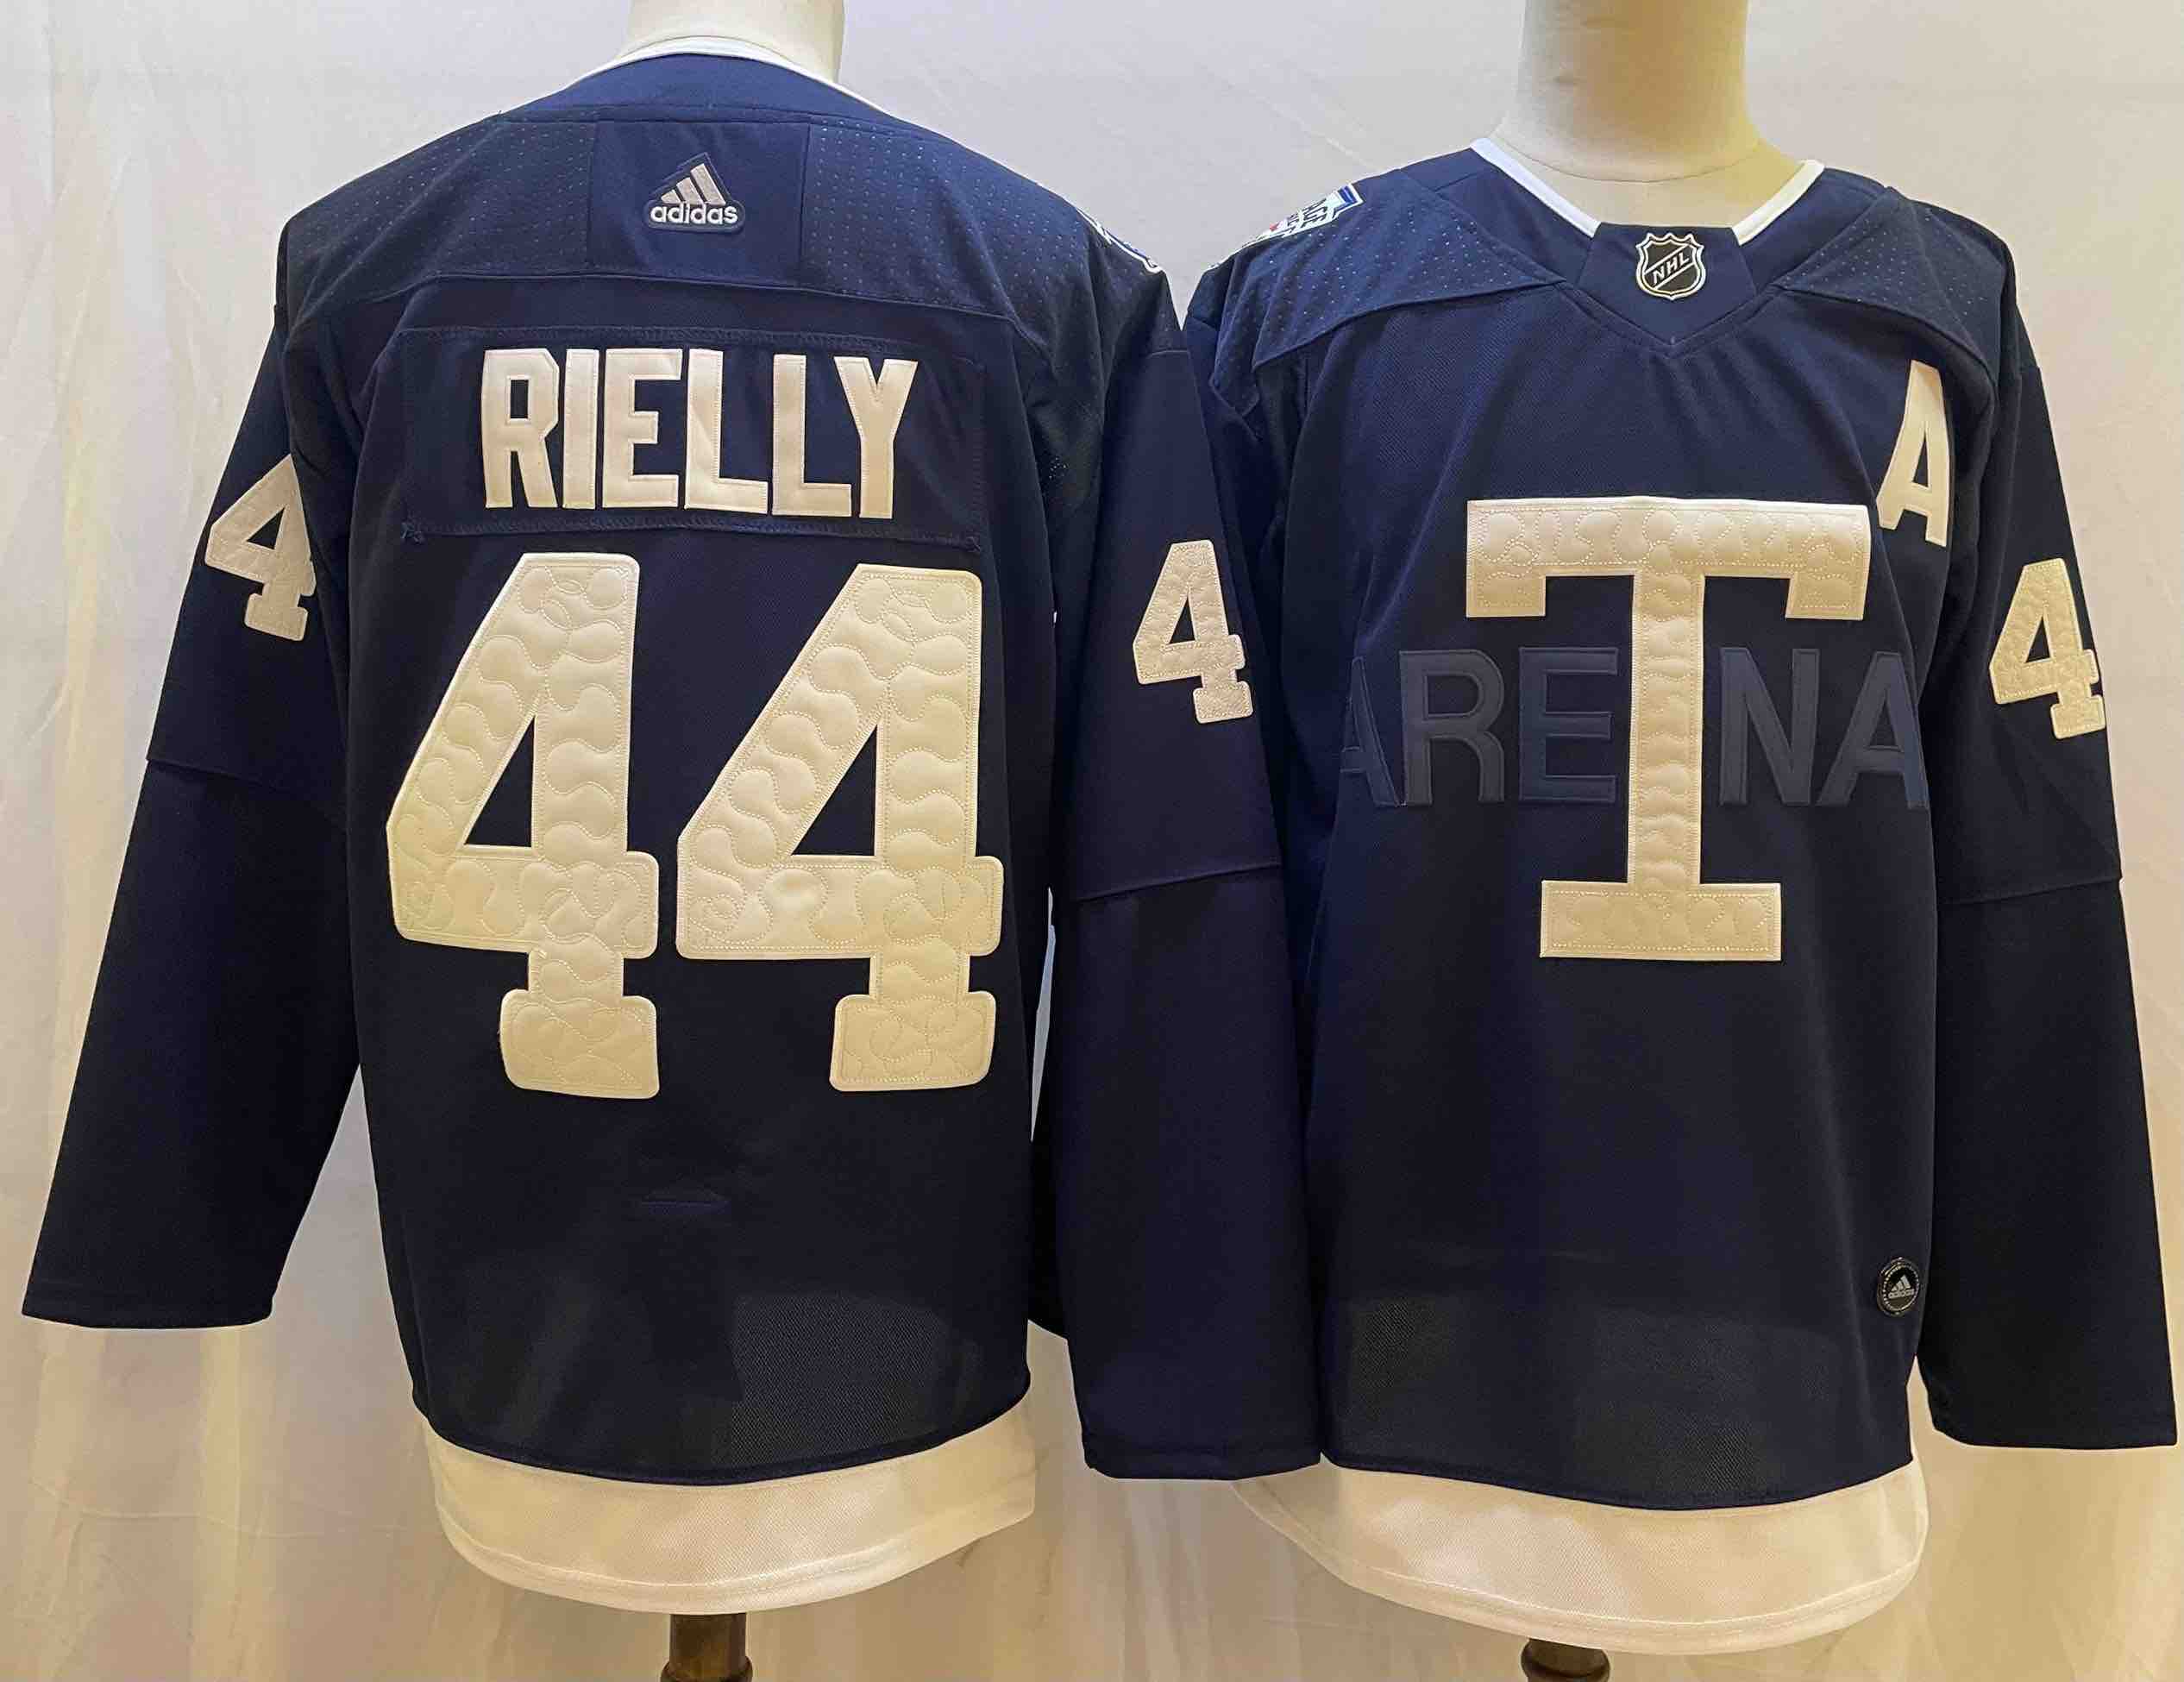 NHL Toronto Maple leafs #44 Rielly Blue Jersey